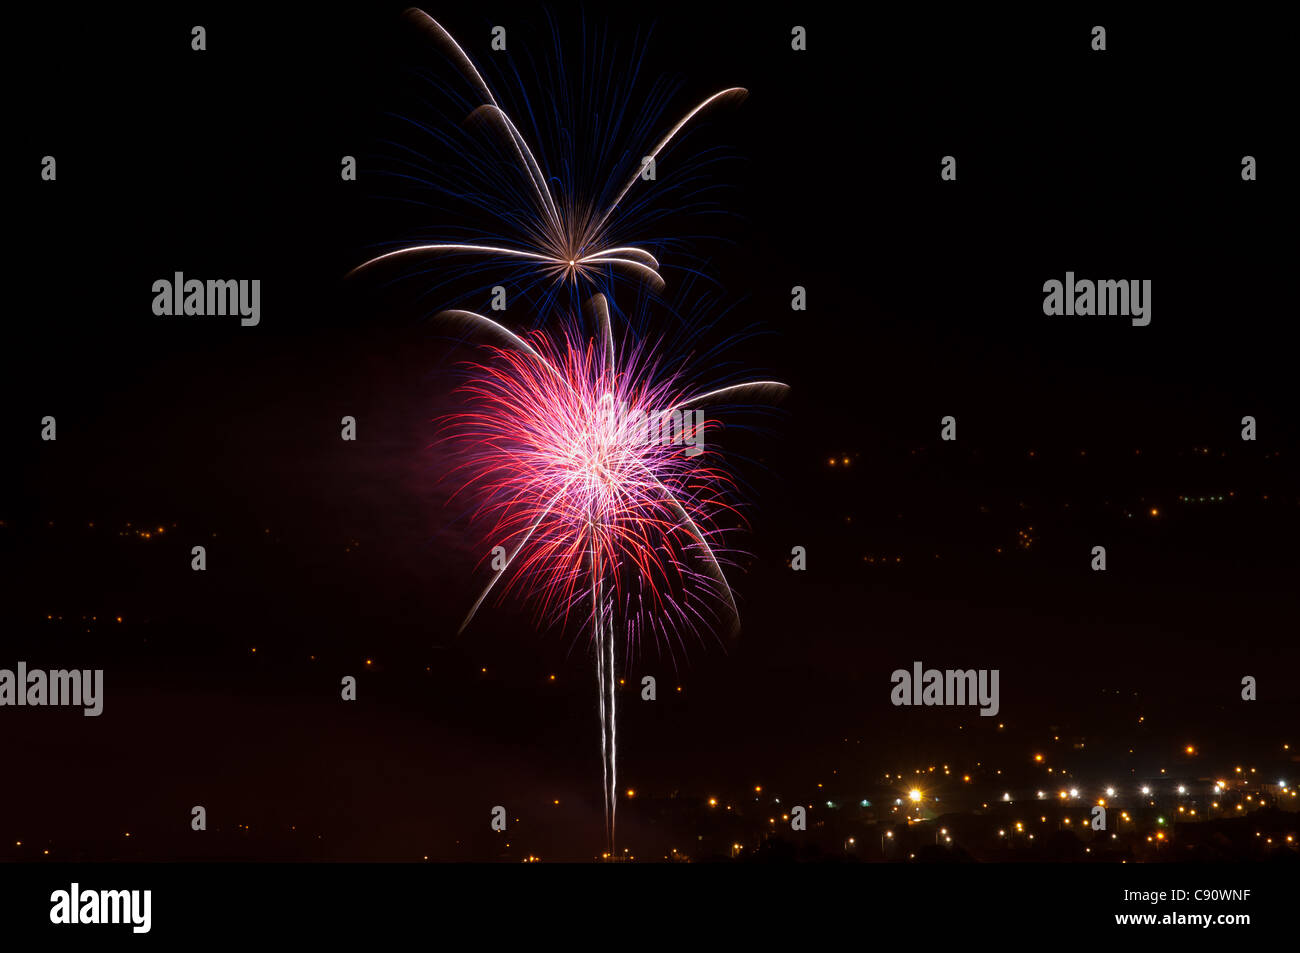 A celebration of fireworks on the fifth of November bonfire night, with a spectacular show of colors in the night time sky. Stock Photo